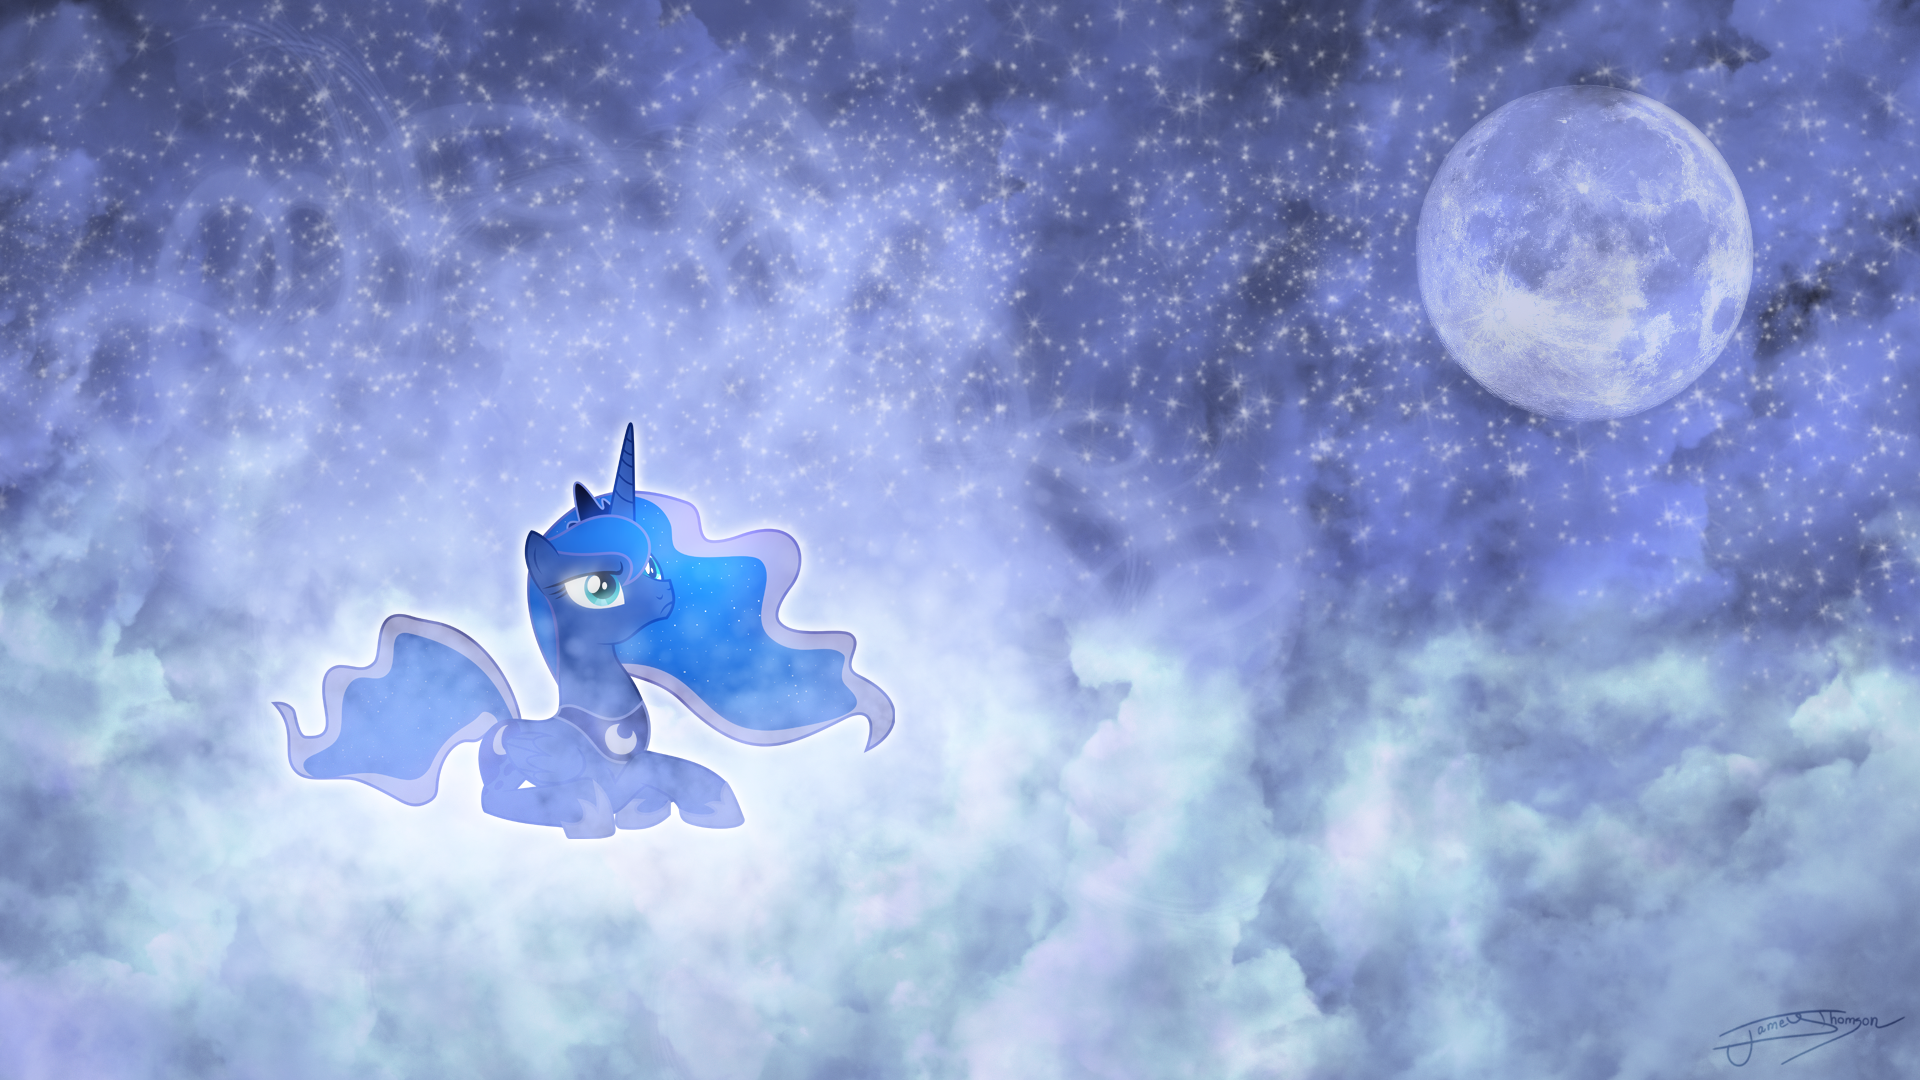 Princess Luna - The Silence of the Night by Fennrick and Jamey4